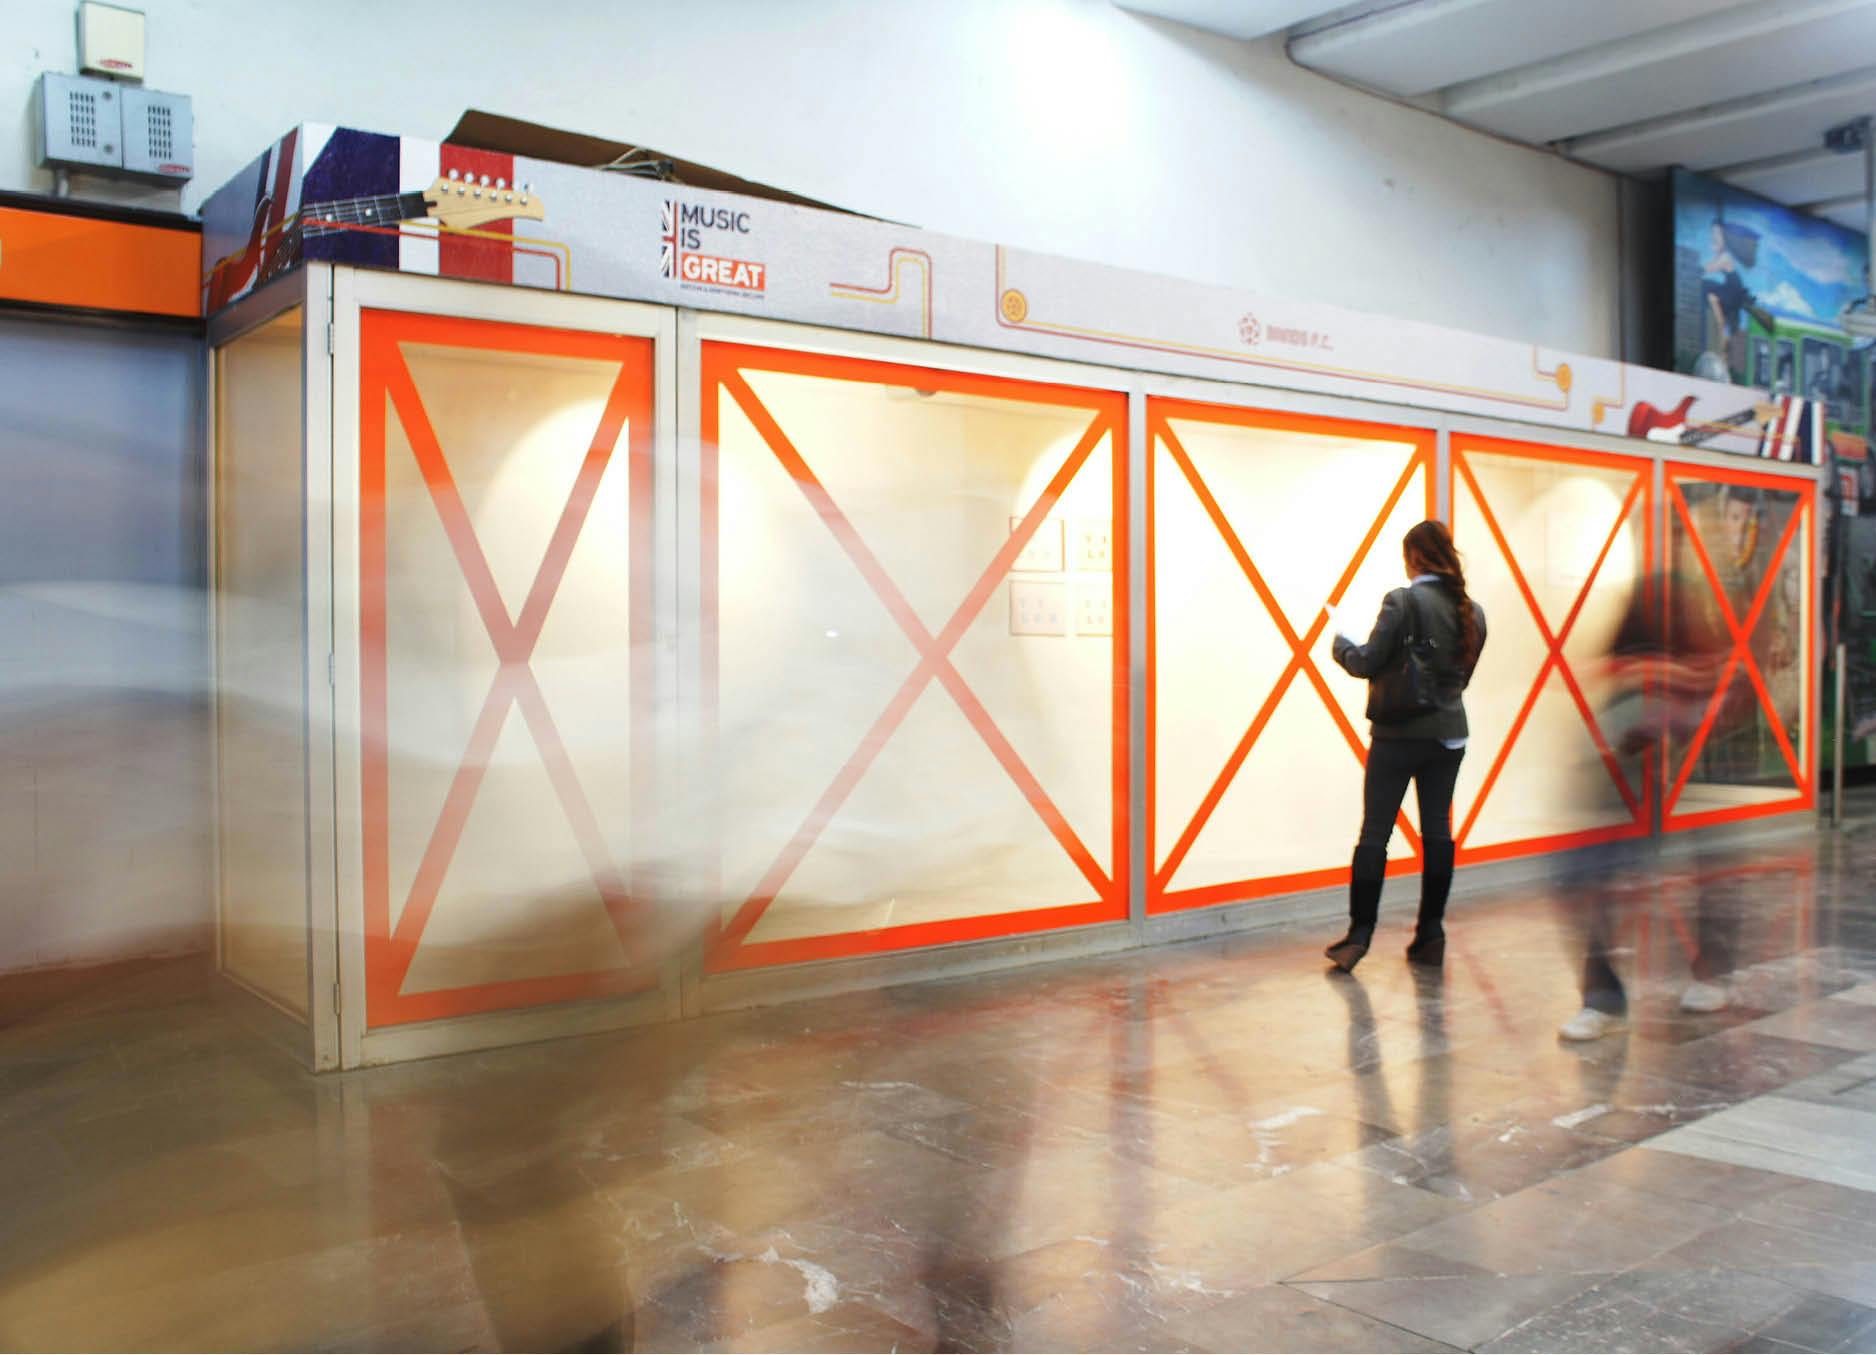 Public artwork 'Telon' by Artist Henry Coleman installed at Mexico city Metro Station Auditorio with vibrant orange vinyl crosses applied to a large vitrine with a woman looking inside whilst blurred figures move past